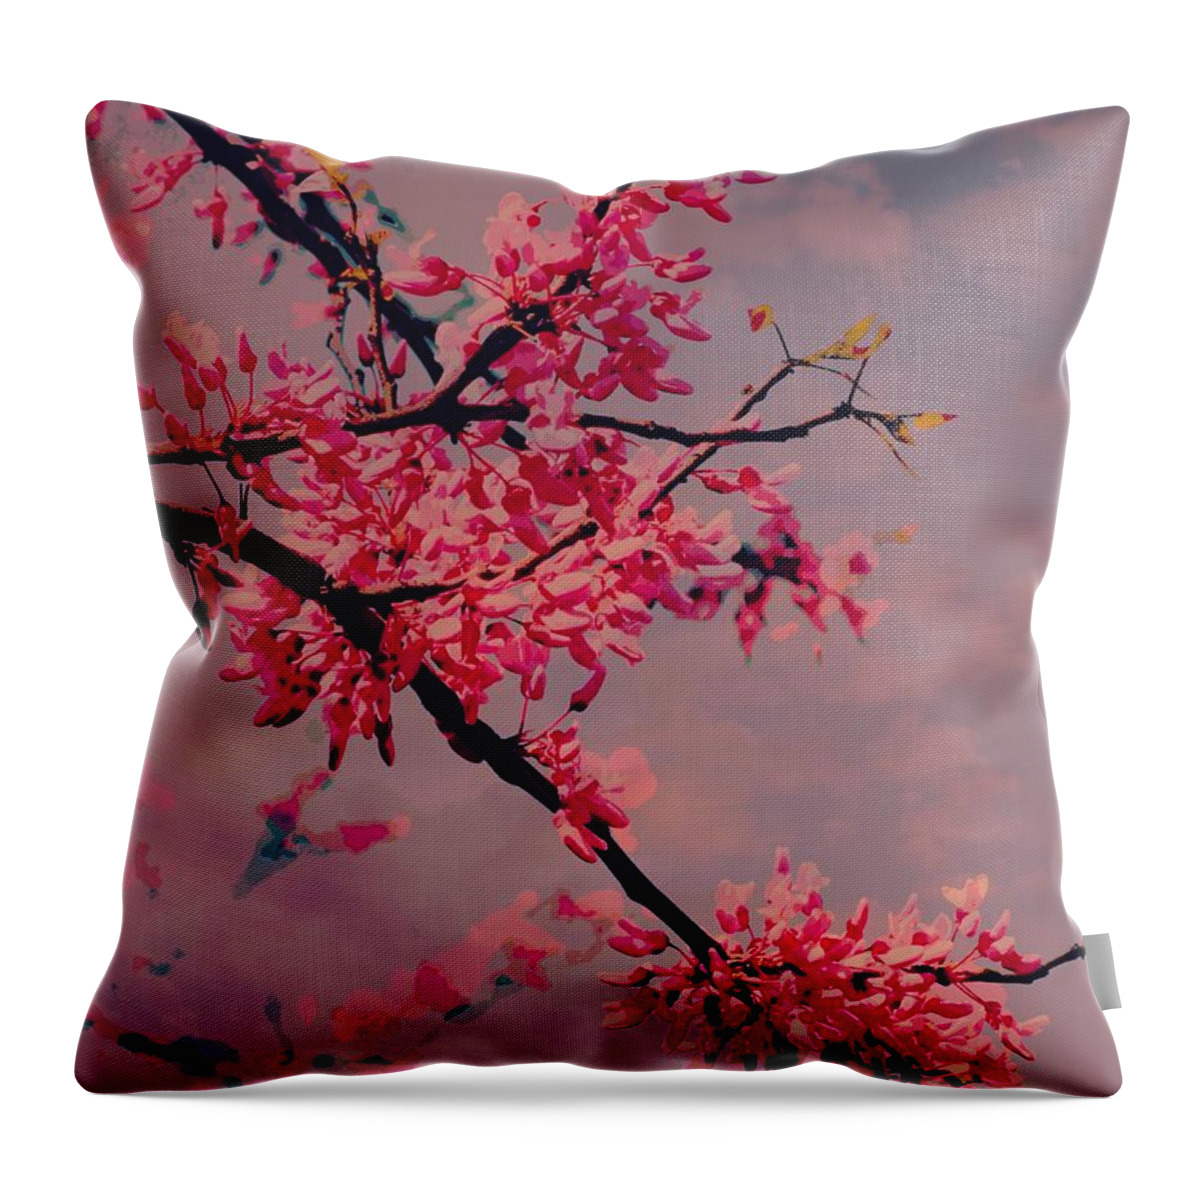 Spring Throw Pillow featuring the digital art After the Rain #1 by Tg Devore